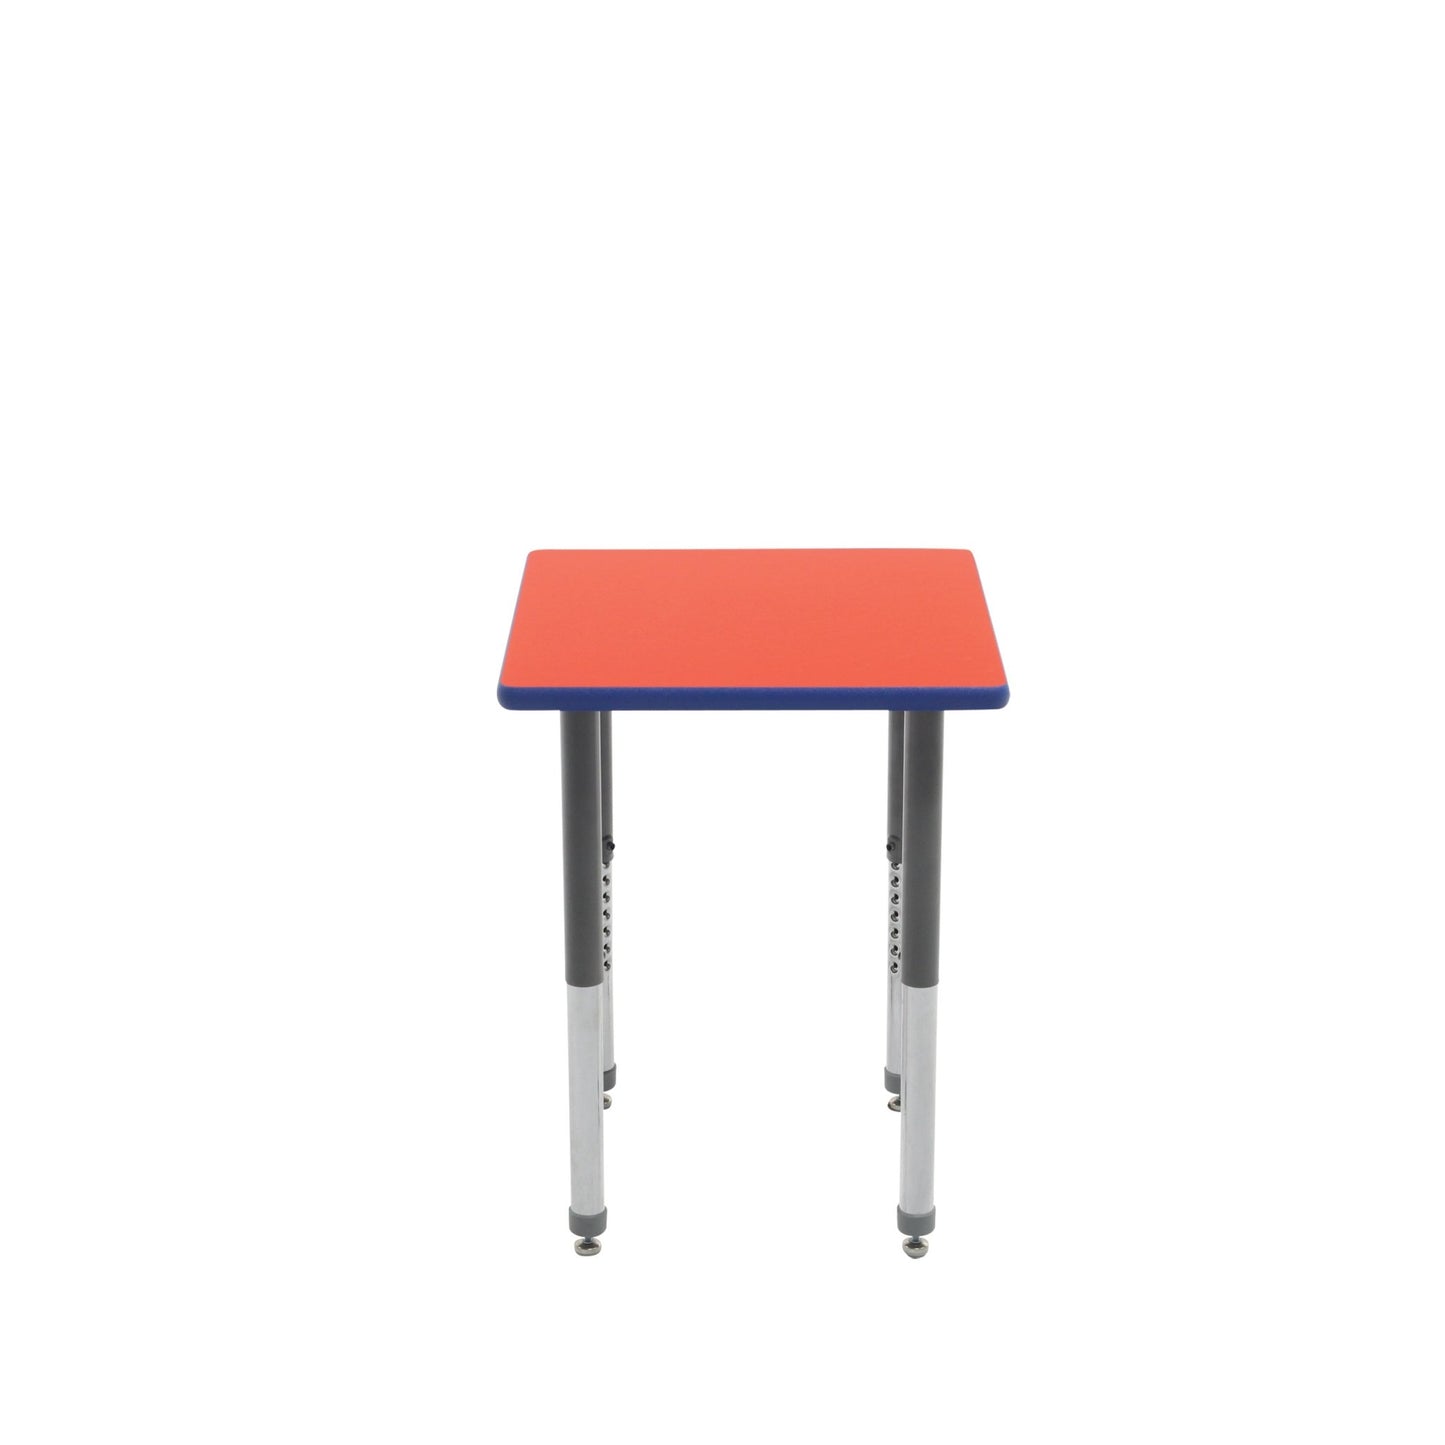 AmTab Whiteboard Table Markerboard Table Dry Erase Table - Activity Legs - Square - 36"W x 36"L (AmTab AMT-WASQ36D) - SchoolOutlet